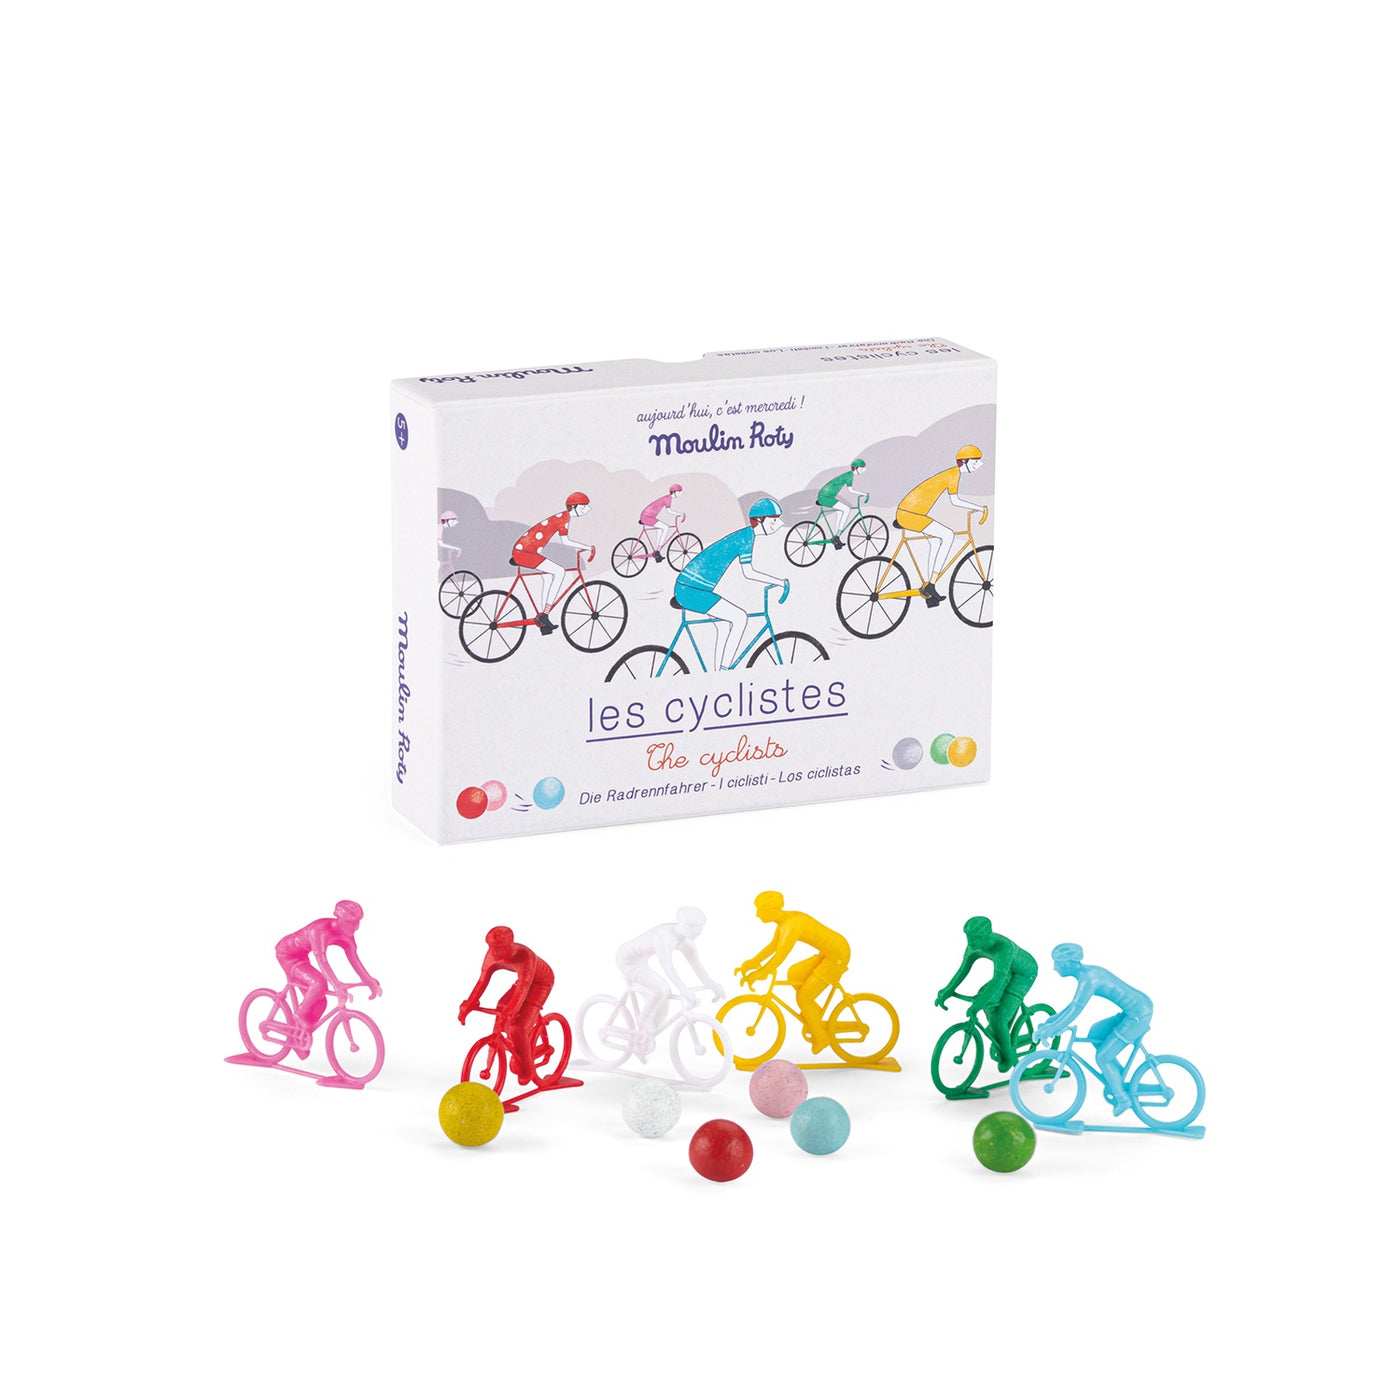 Aujord’hui game of 6 cyclists with marbles